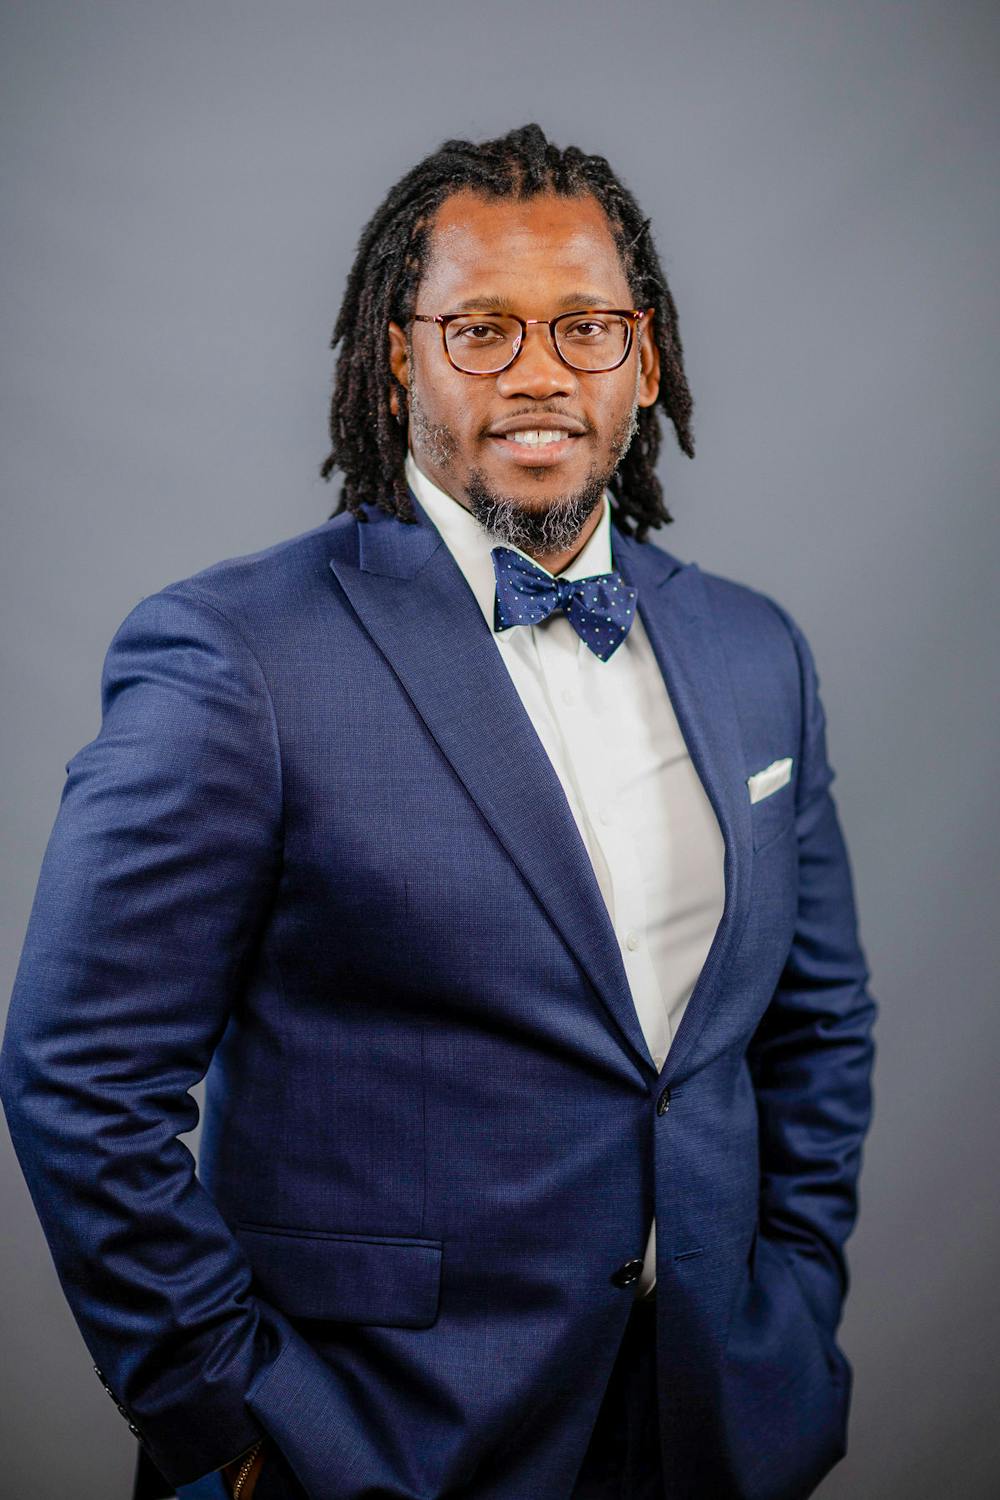 <p>The inaugural position of assistant vice president for inclusion, campus culture and engagement was created as part of the University’s Diversity and Inclusion Action Plan.</p><p>Courtesy of Tristan Glenn</p>